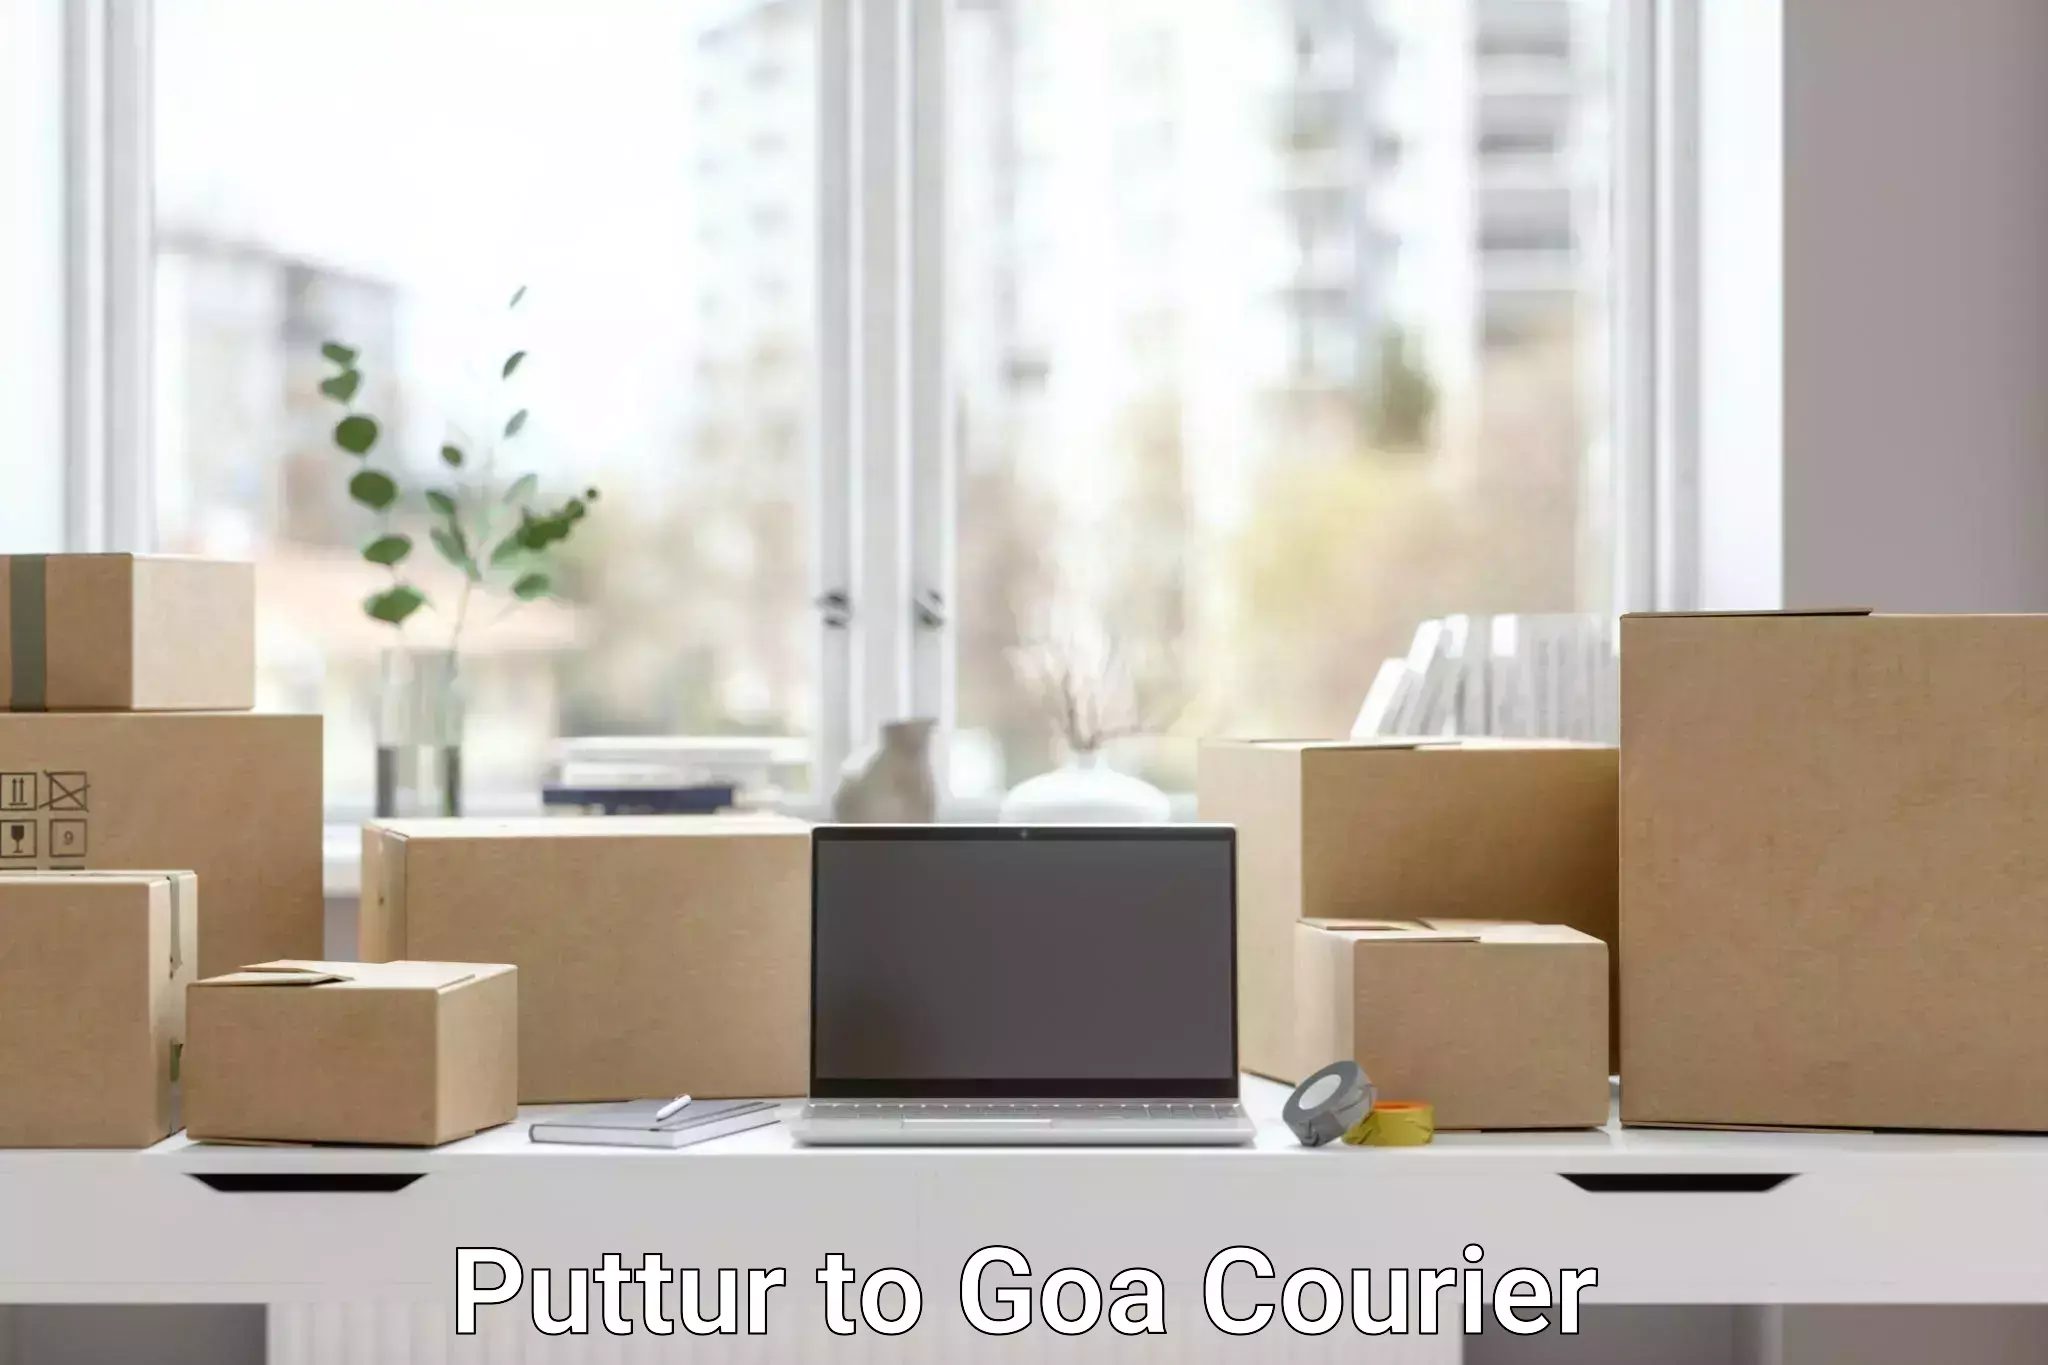 Global courier networks Puttur to Goa